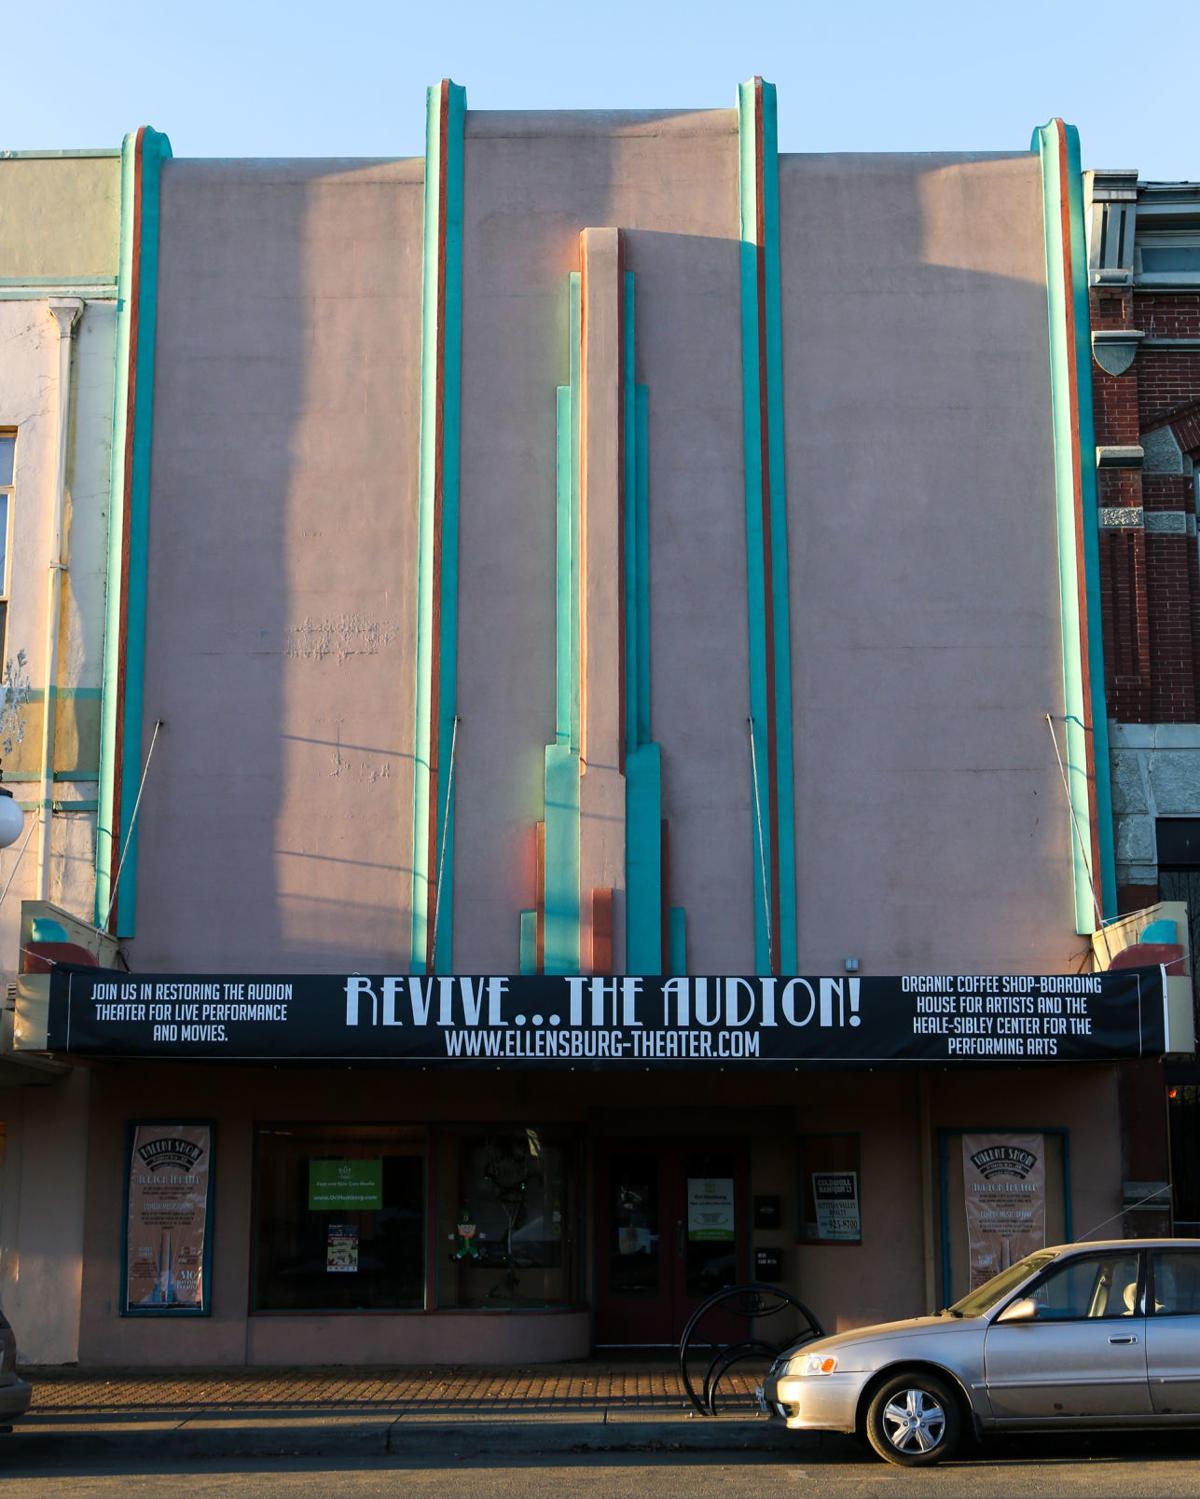 New Project Aims To Revitalize Audion Theater News Dailyrecordnewscom